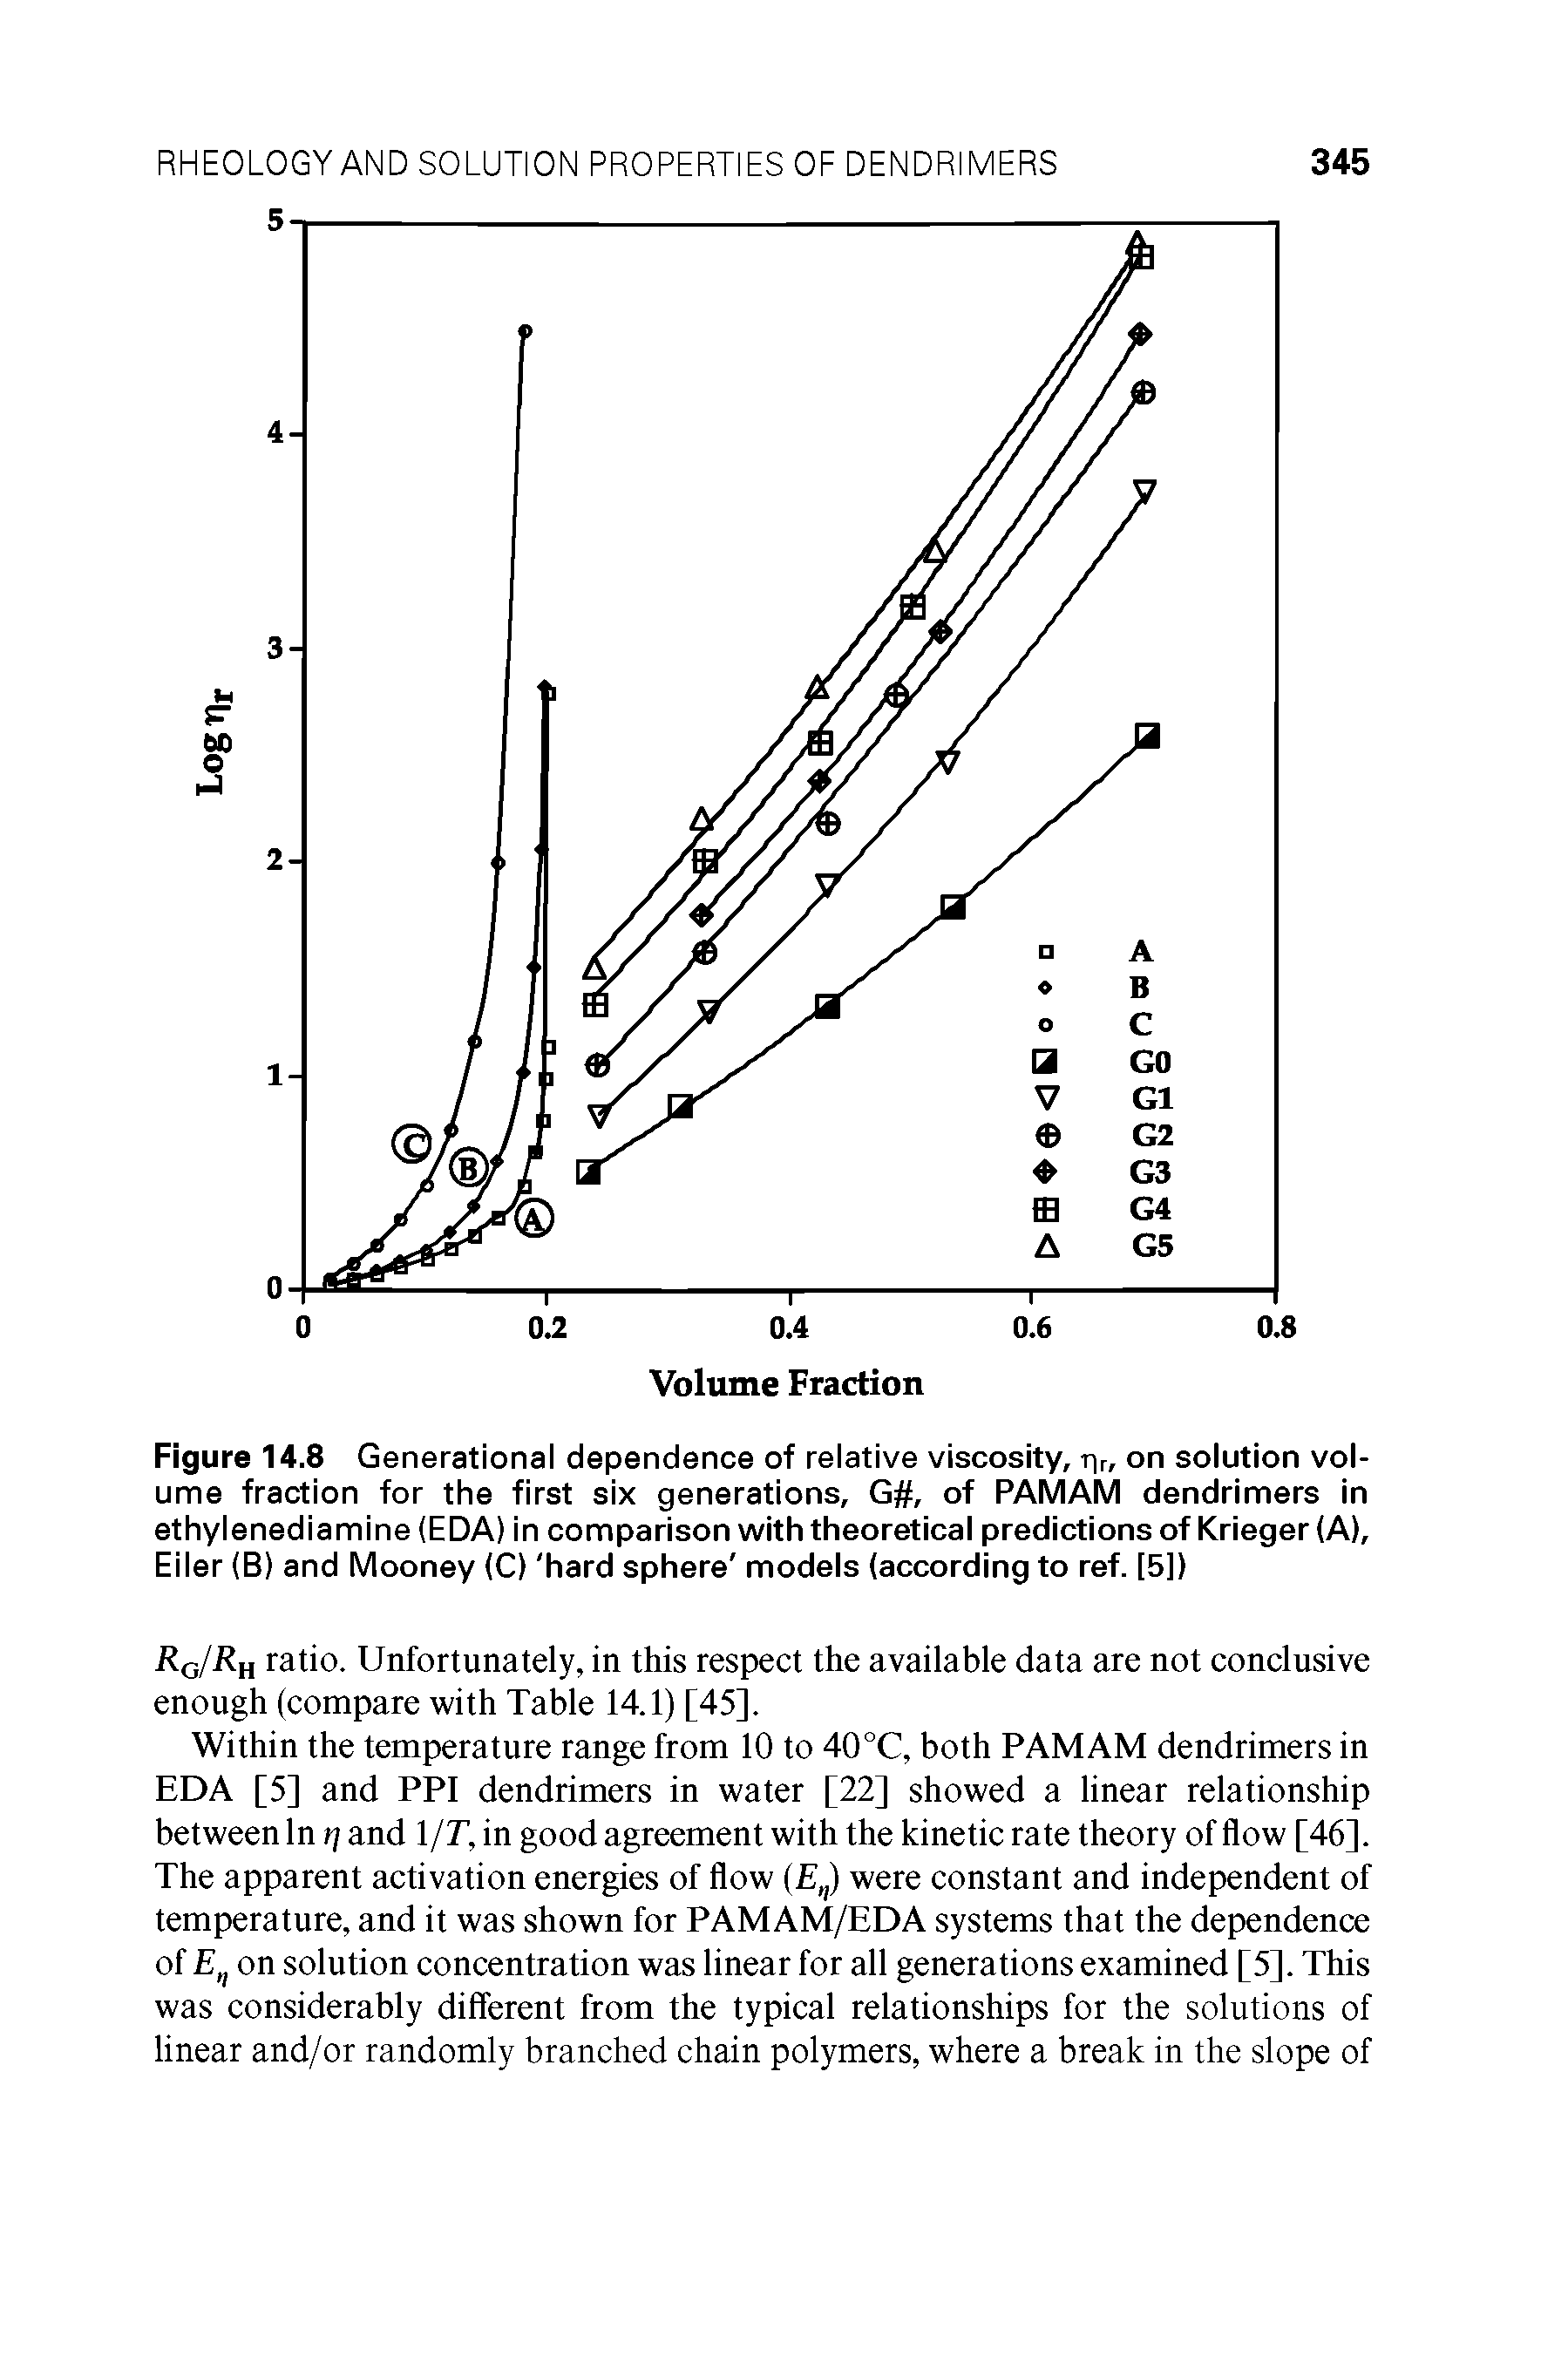 Figure 14.8 Generational dependence of relative viscosity, tv, on solution volume fraction for the first six generations, G, of PAMAM dendrimers in ethylenediamine (EDA) in comparison with theoretical predictions of Krieger (A), Eiler (B) and Mooney (C) hard sphere models (according to ref. [5])...